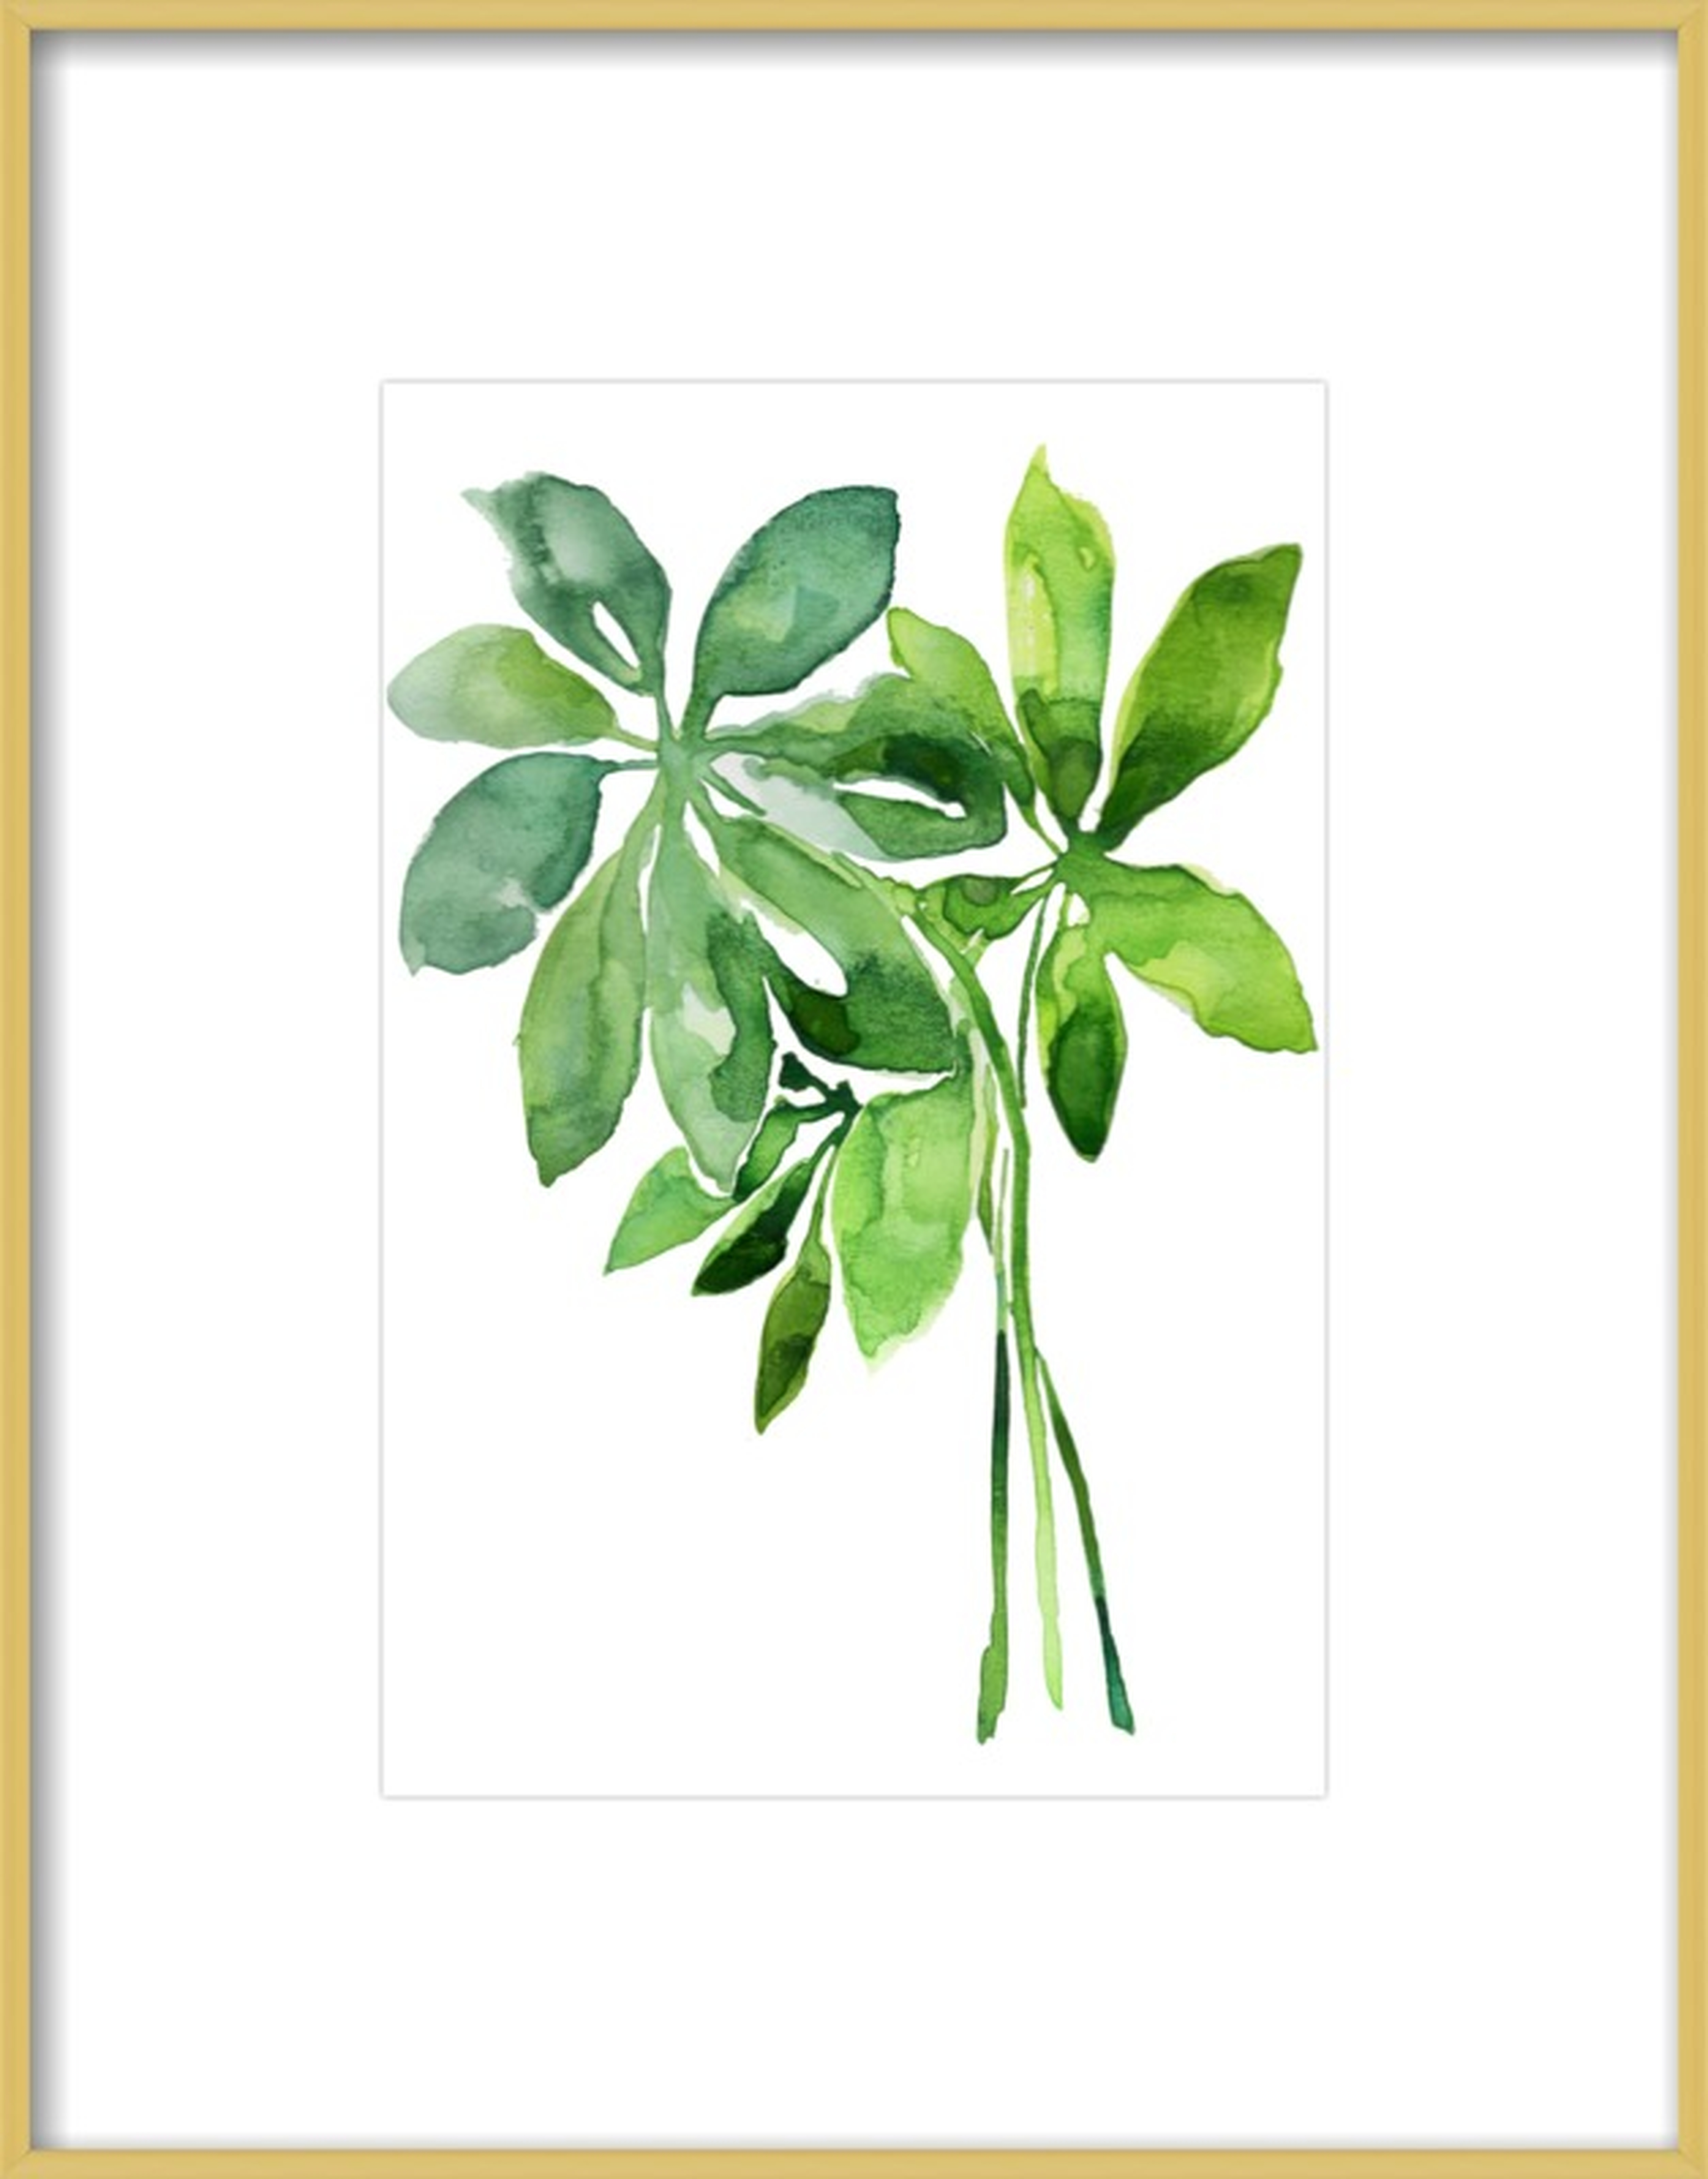 Arboricola study - 14x18" - Frosted Gold Metal Frame with Matte - Artfully Walls